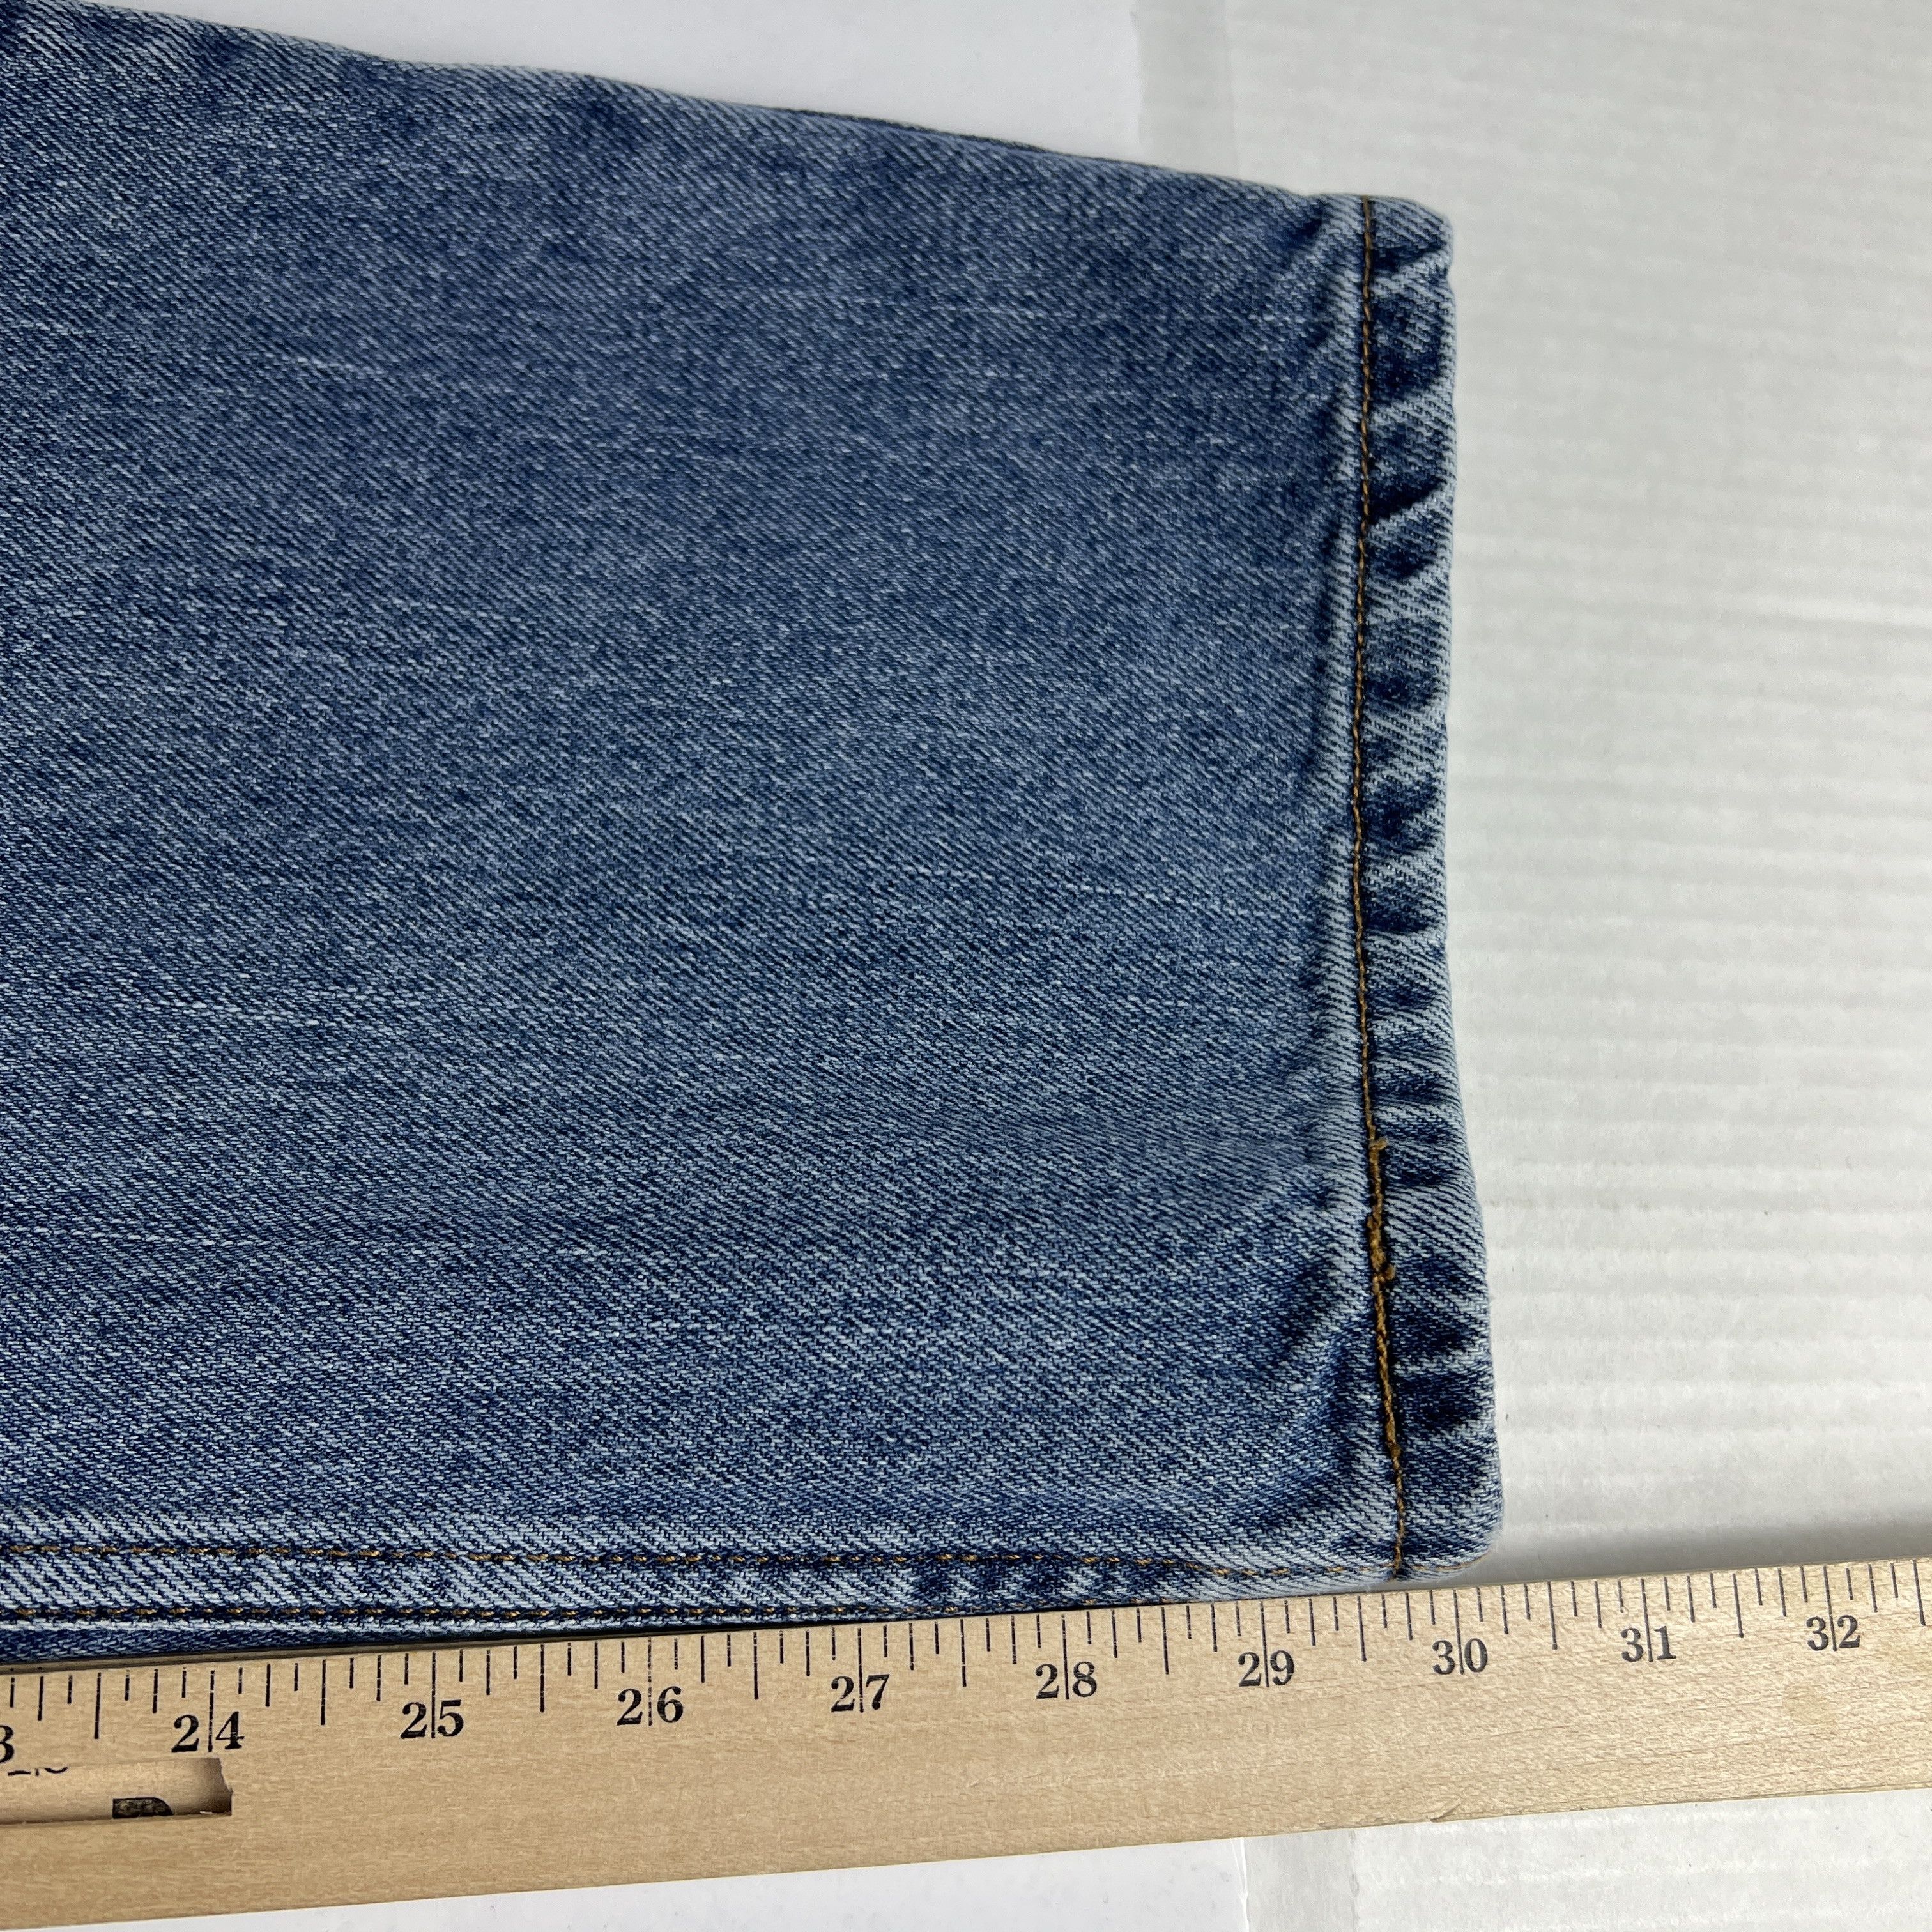 Levi's Y2K Levi's Jean 550 Relaxed Straight Blue Faded Cotton Denim Size US 34 / EU 50 - 18 Thumbnail